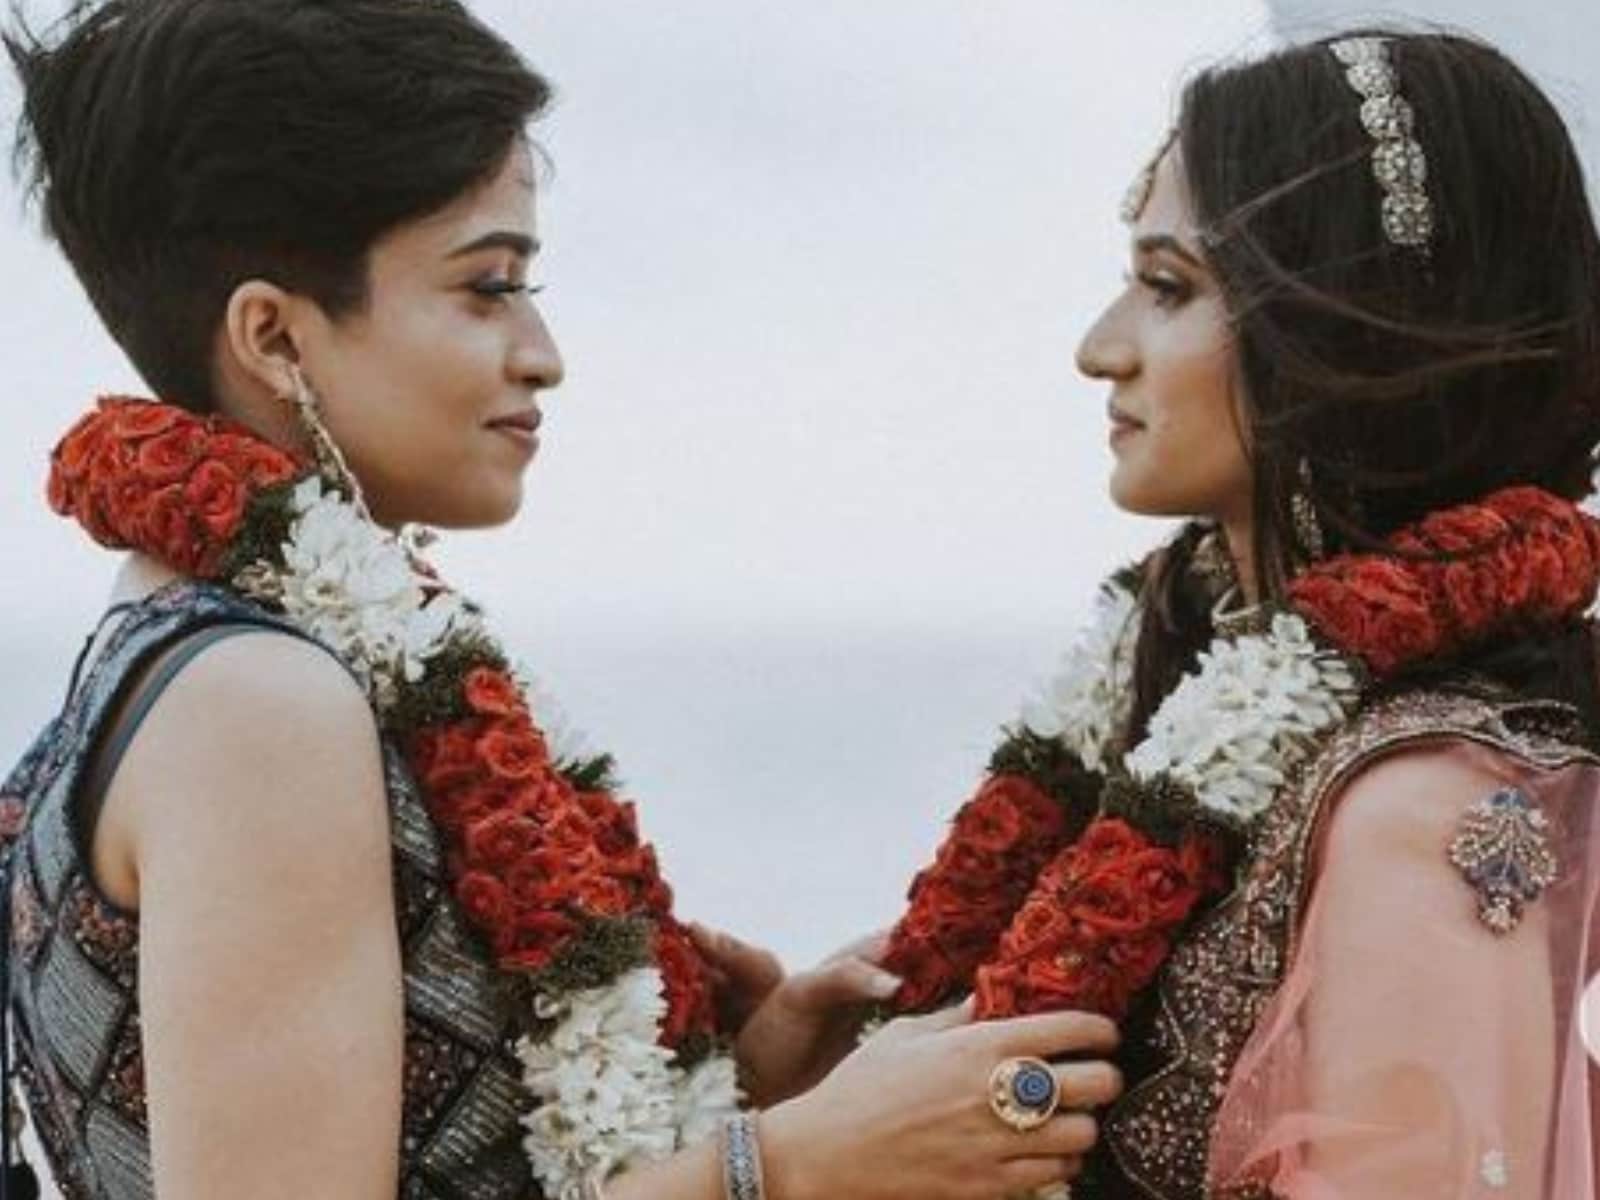 Tamilschool Lesbians Girl Doing Sex Each Other Videos - Kerala Lesbian Couple, Once Separated by Families, Turns Brides in Wedding  Photoshoot